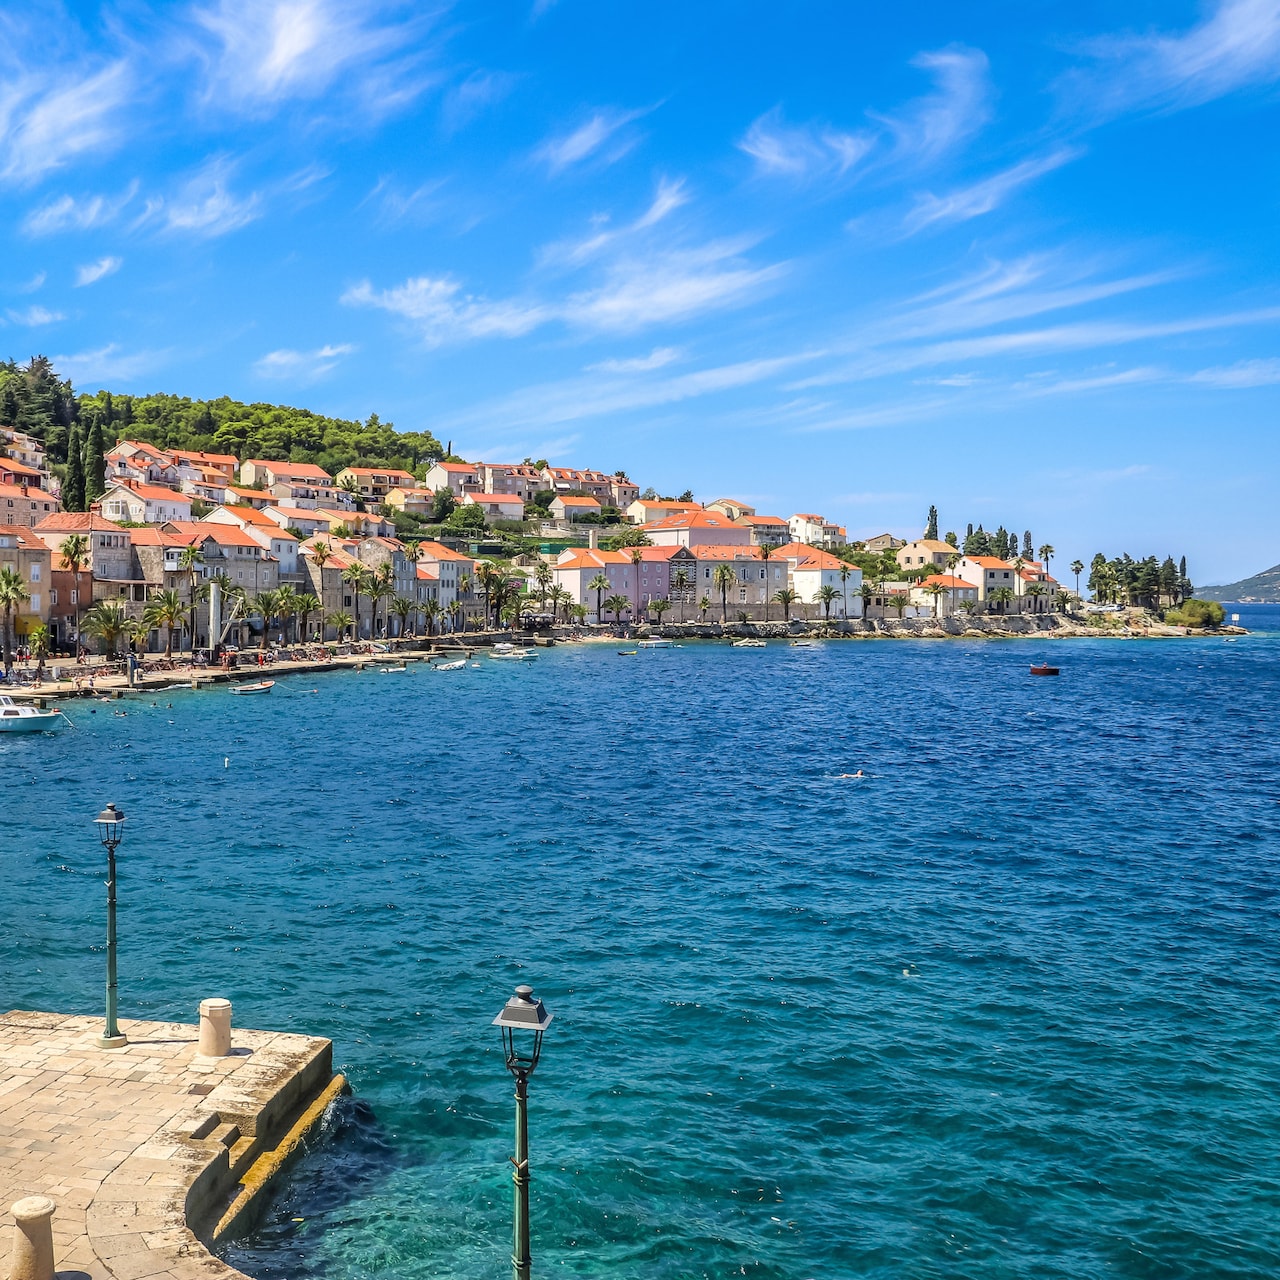 Buildings in the seaside town on Korcula, Croatia between the Adriatic Sea and a forested hillside